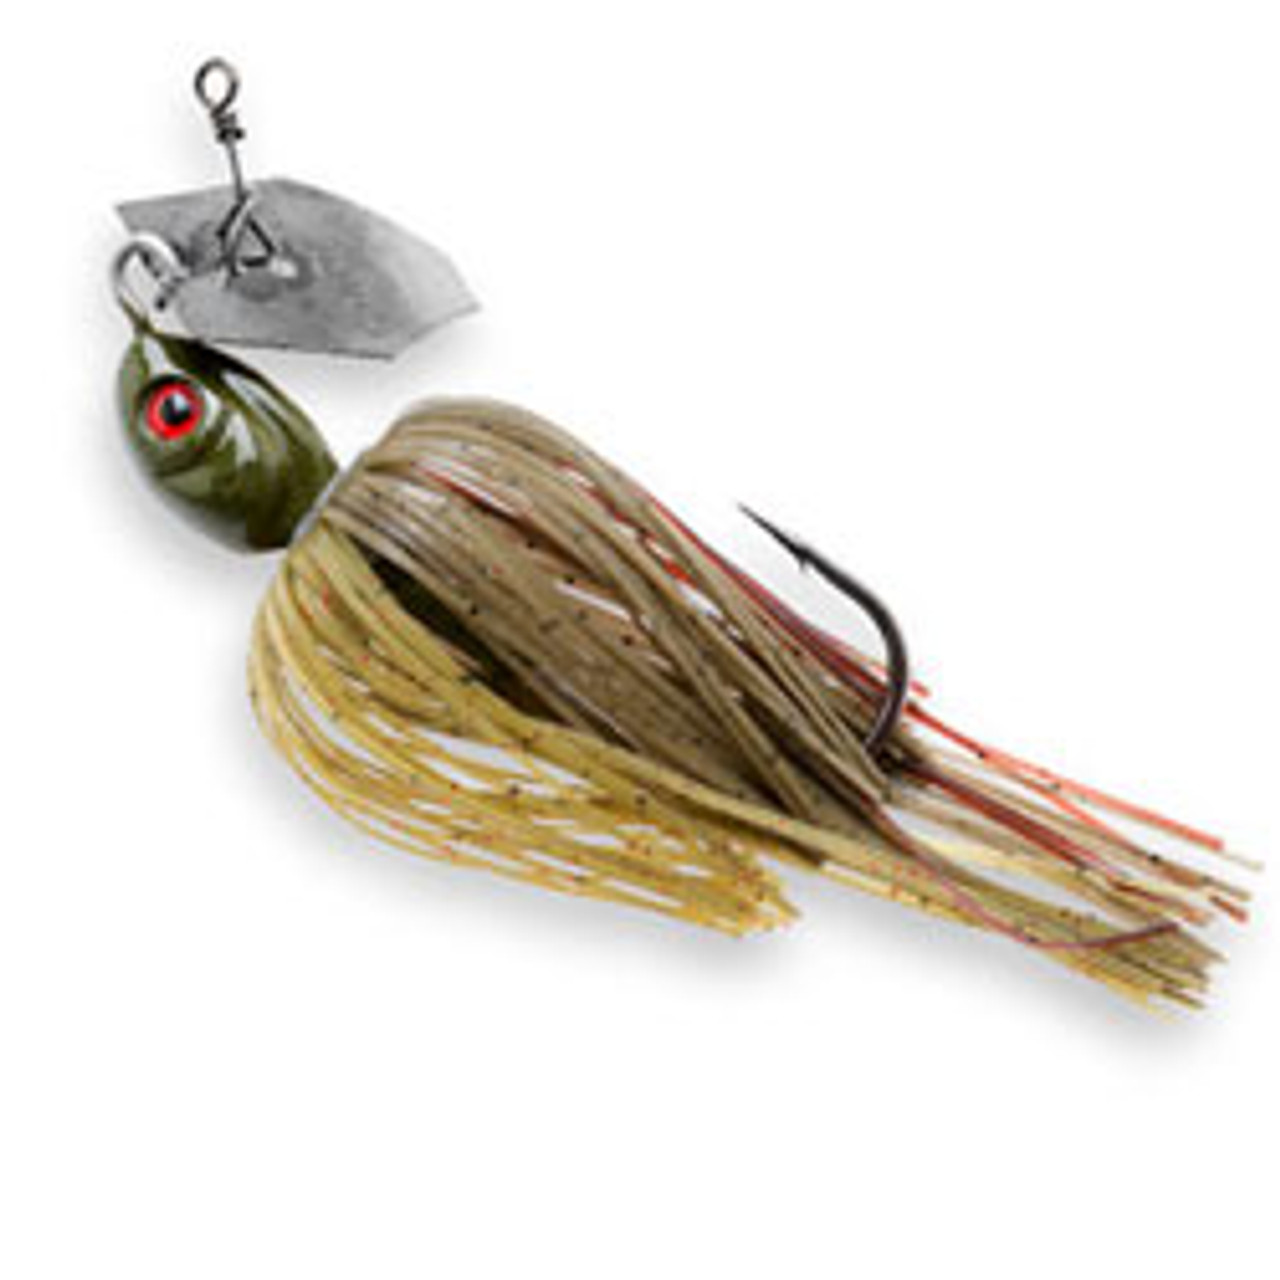 Project Z Chatterbaits 1/2 oz Bladed Jig by Z-Man